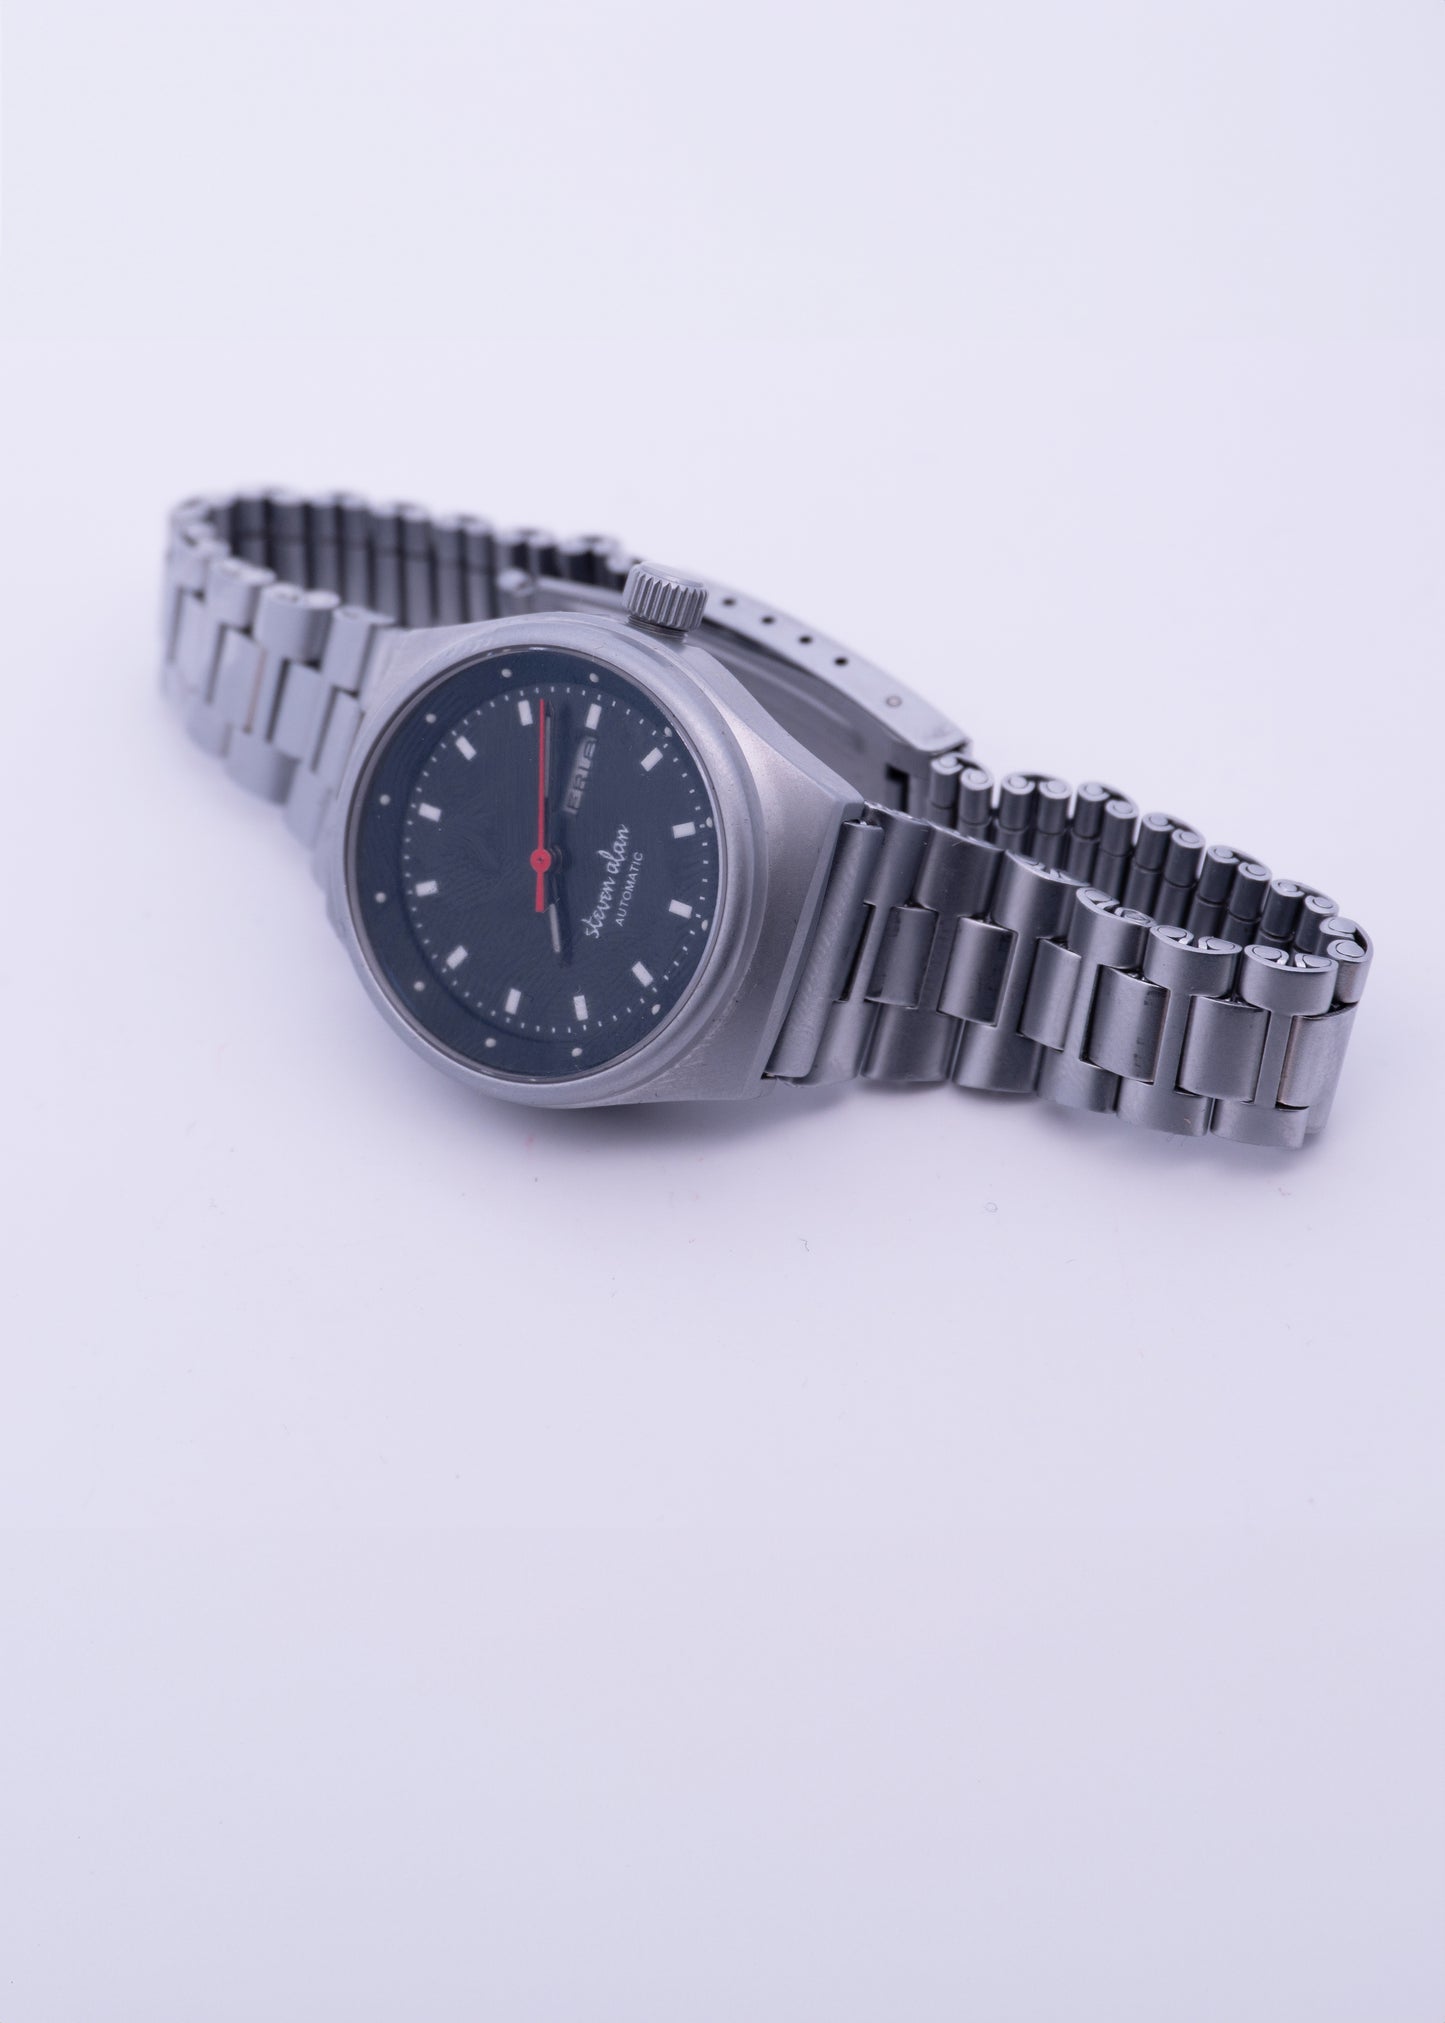 The Military Watch